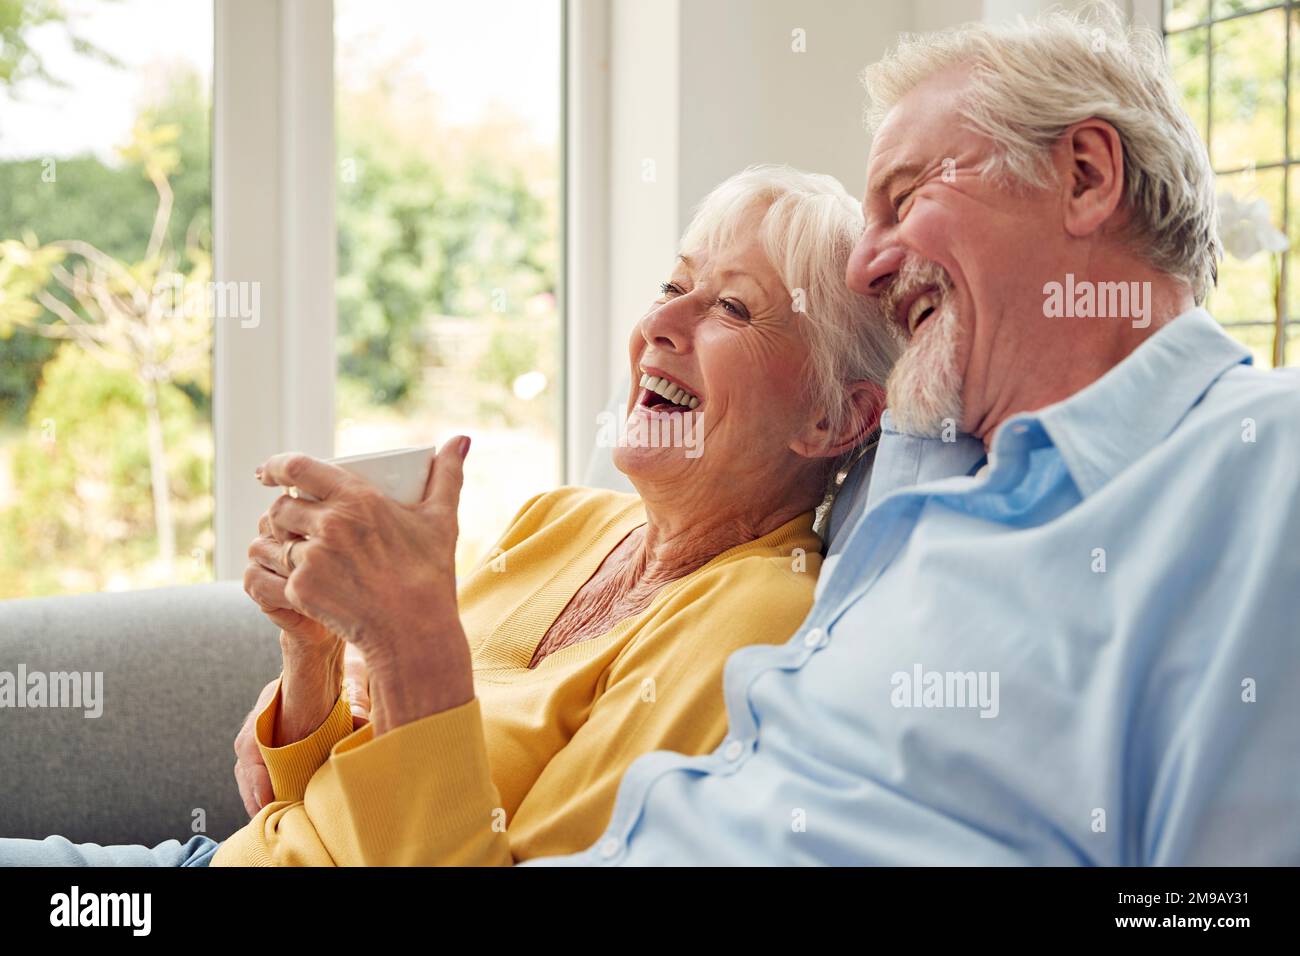 Retired Senior Couple Sitting On Sofa At Home Drinking Coffee And Watching TV Together Stock Photo